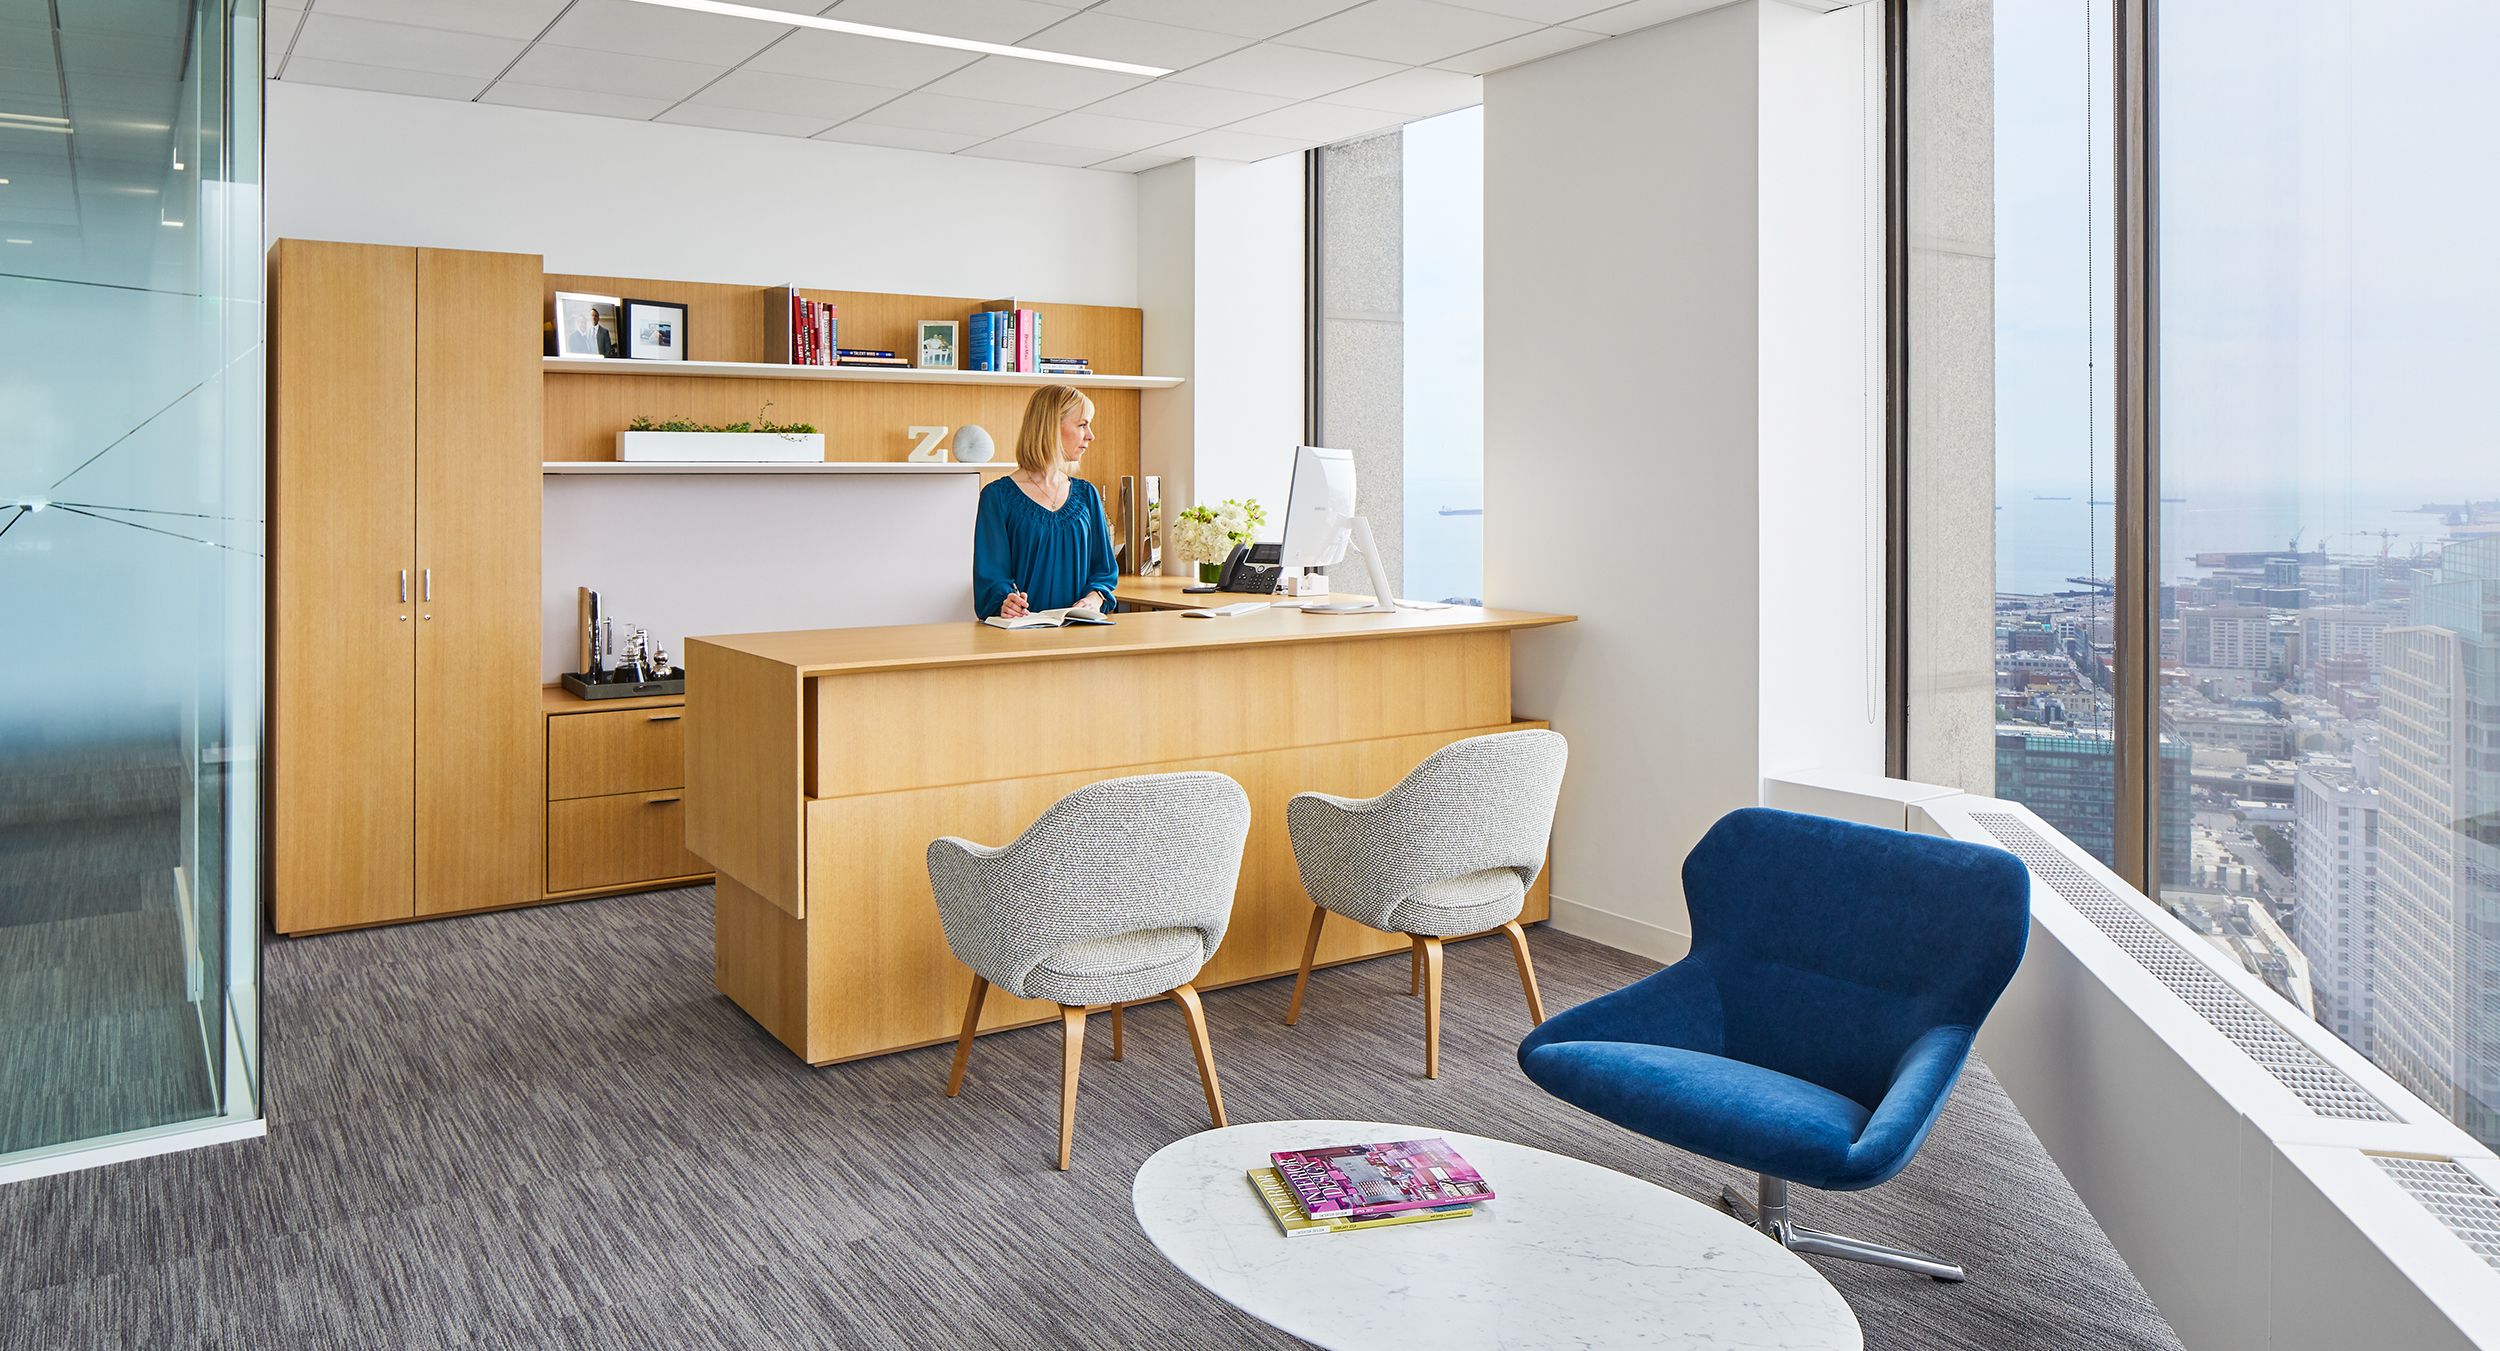 Beautiful private offices feature custom-designed adjustable-height desking in Rift White Oak.